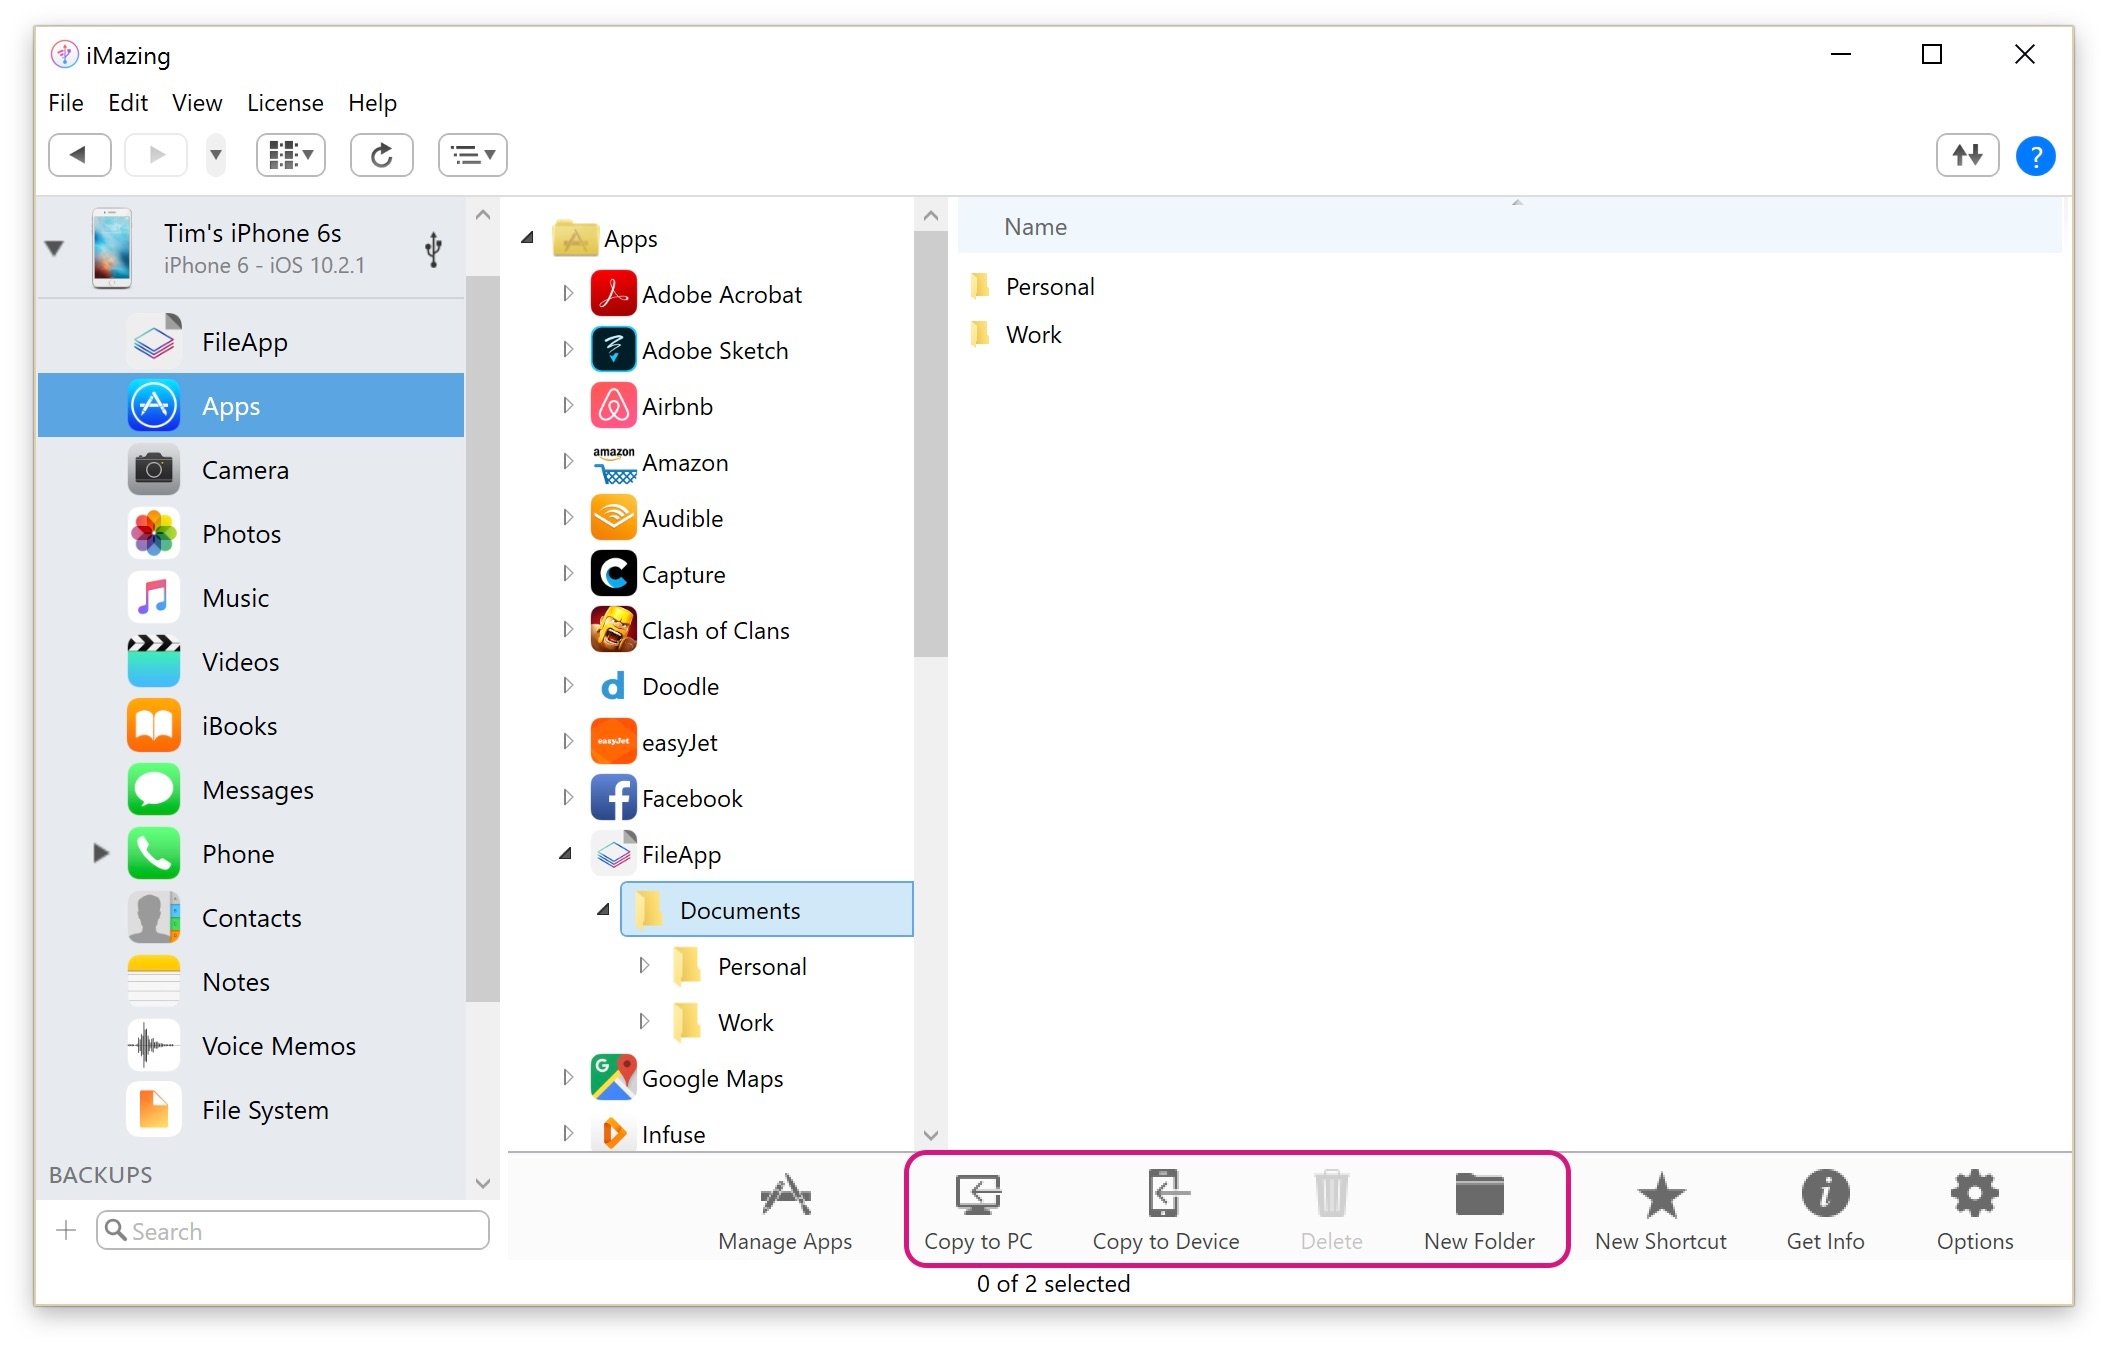 iMazing apps view with actions selected in bottom toolbar 